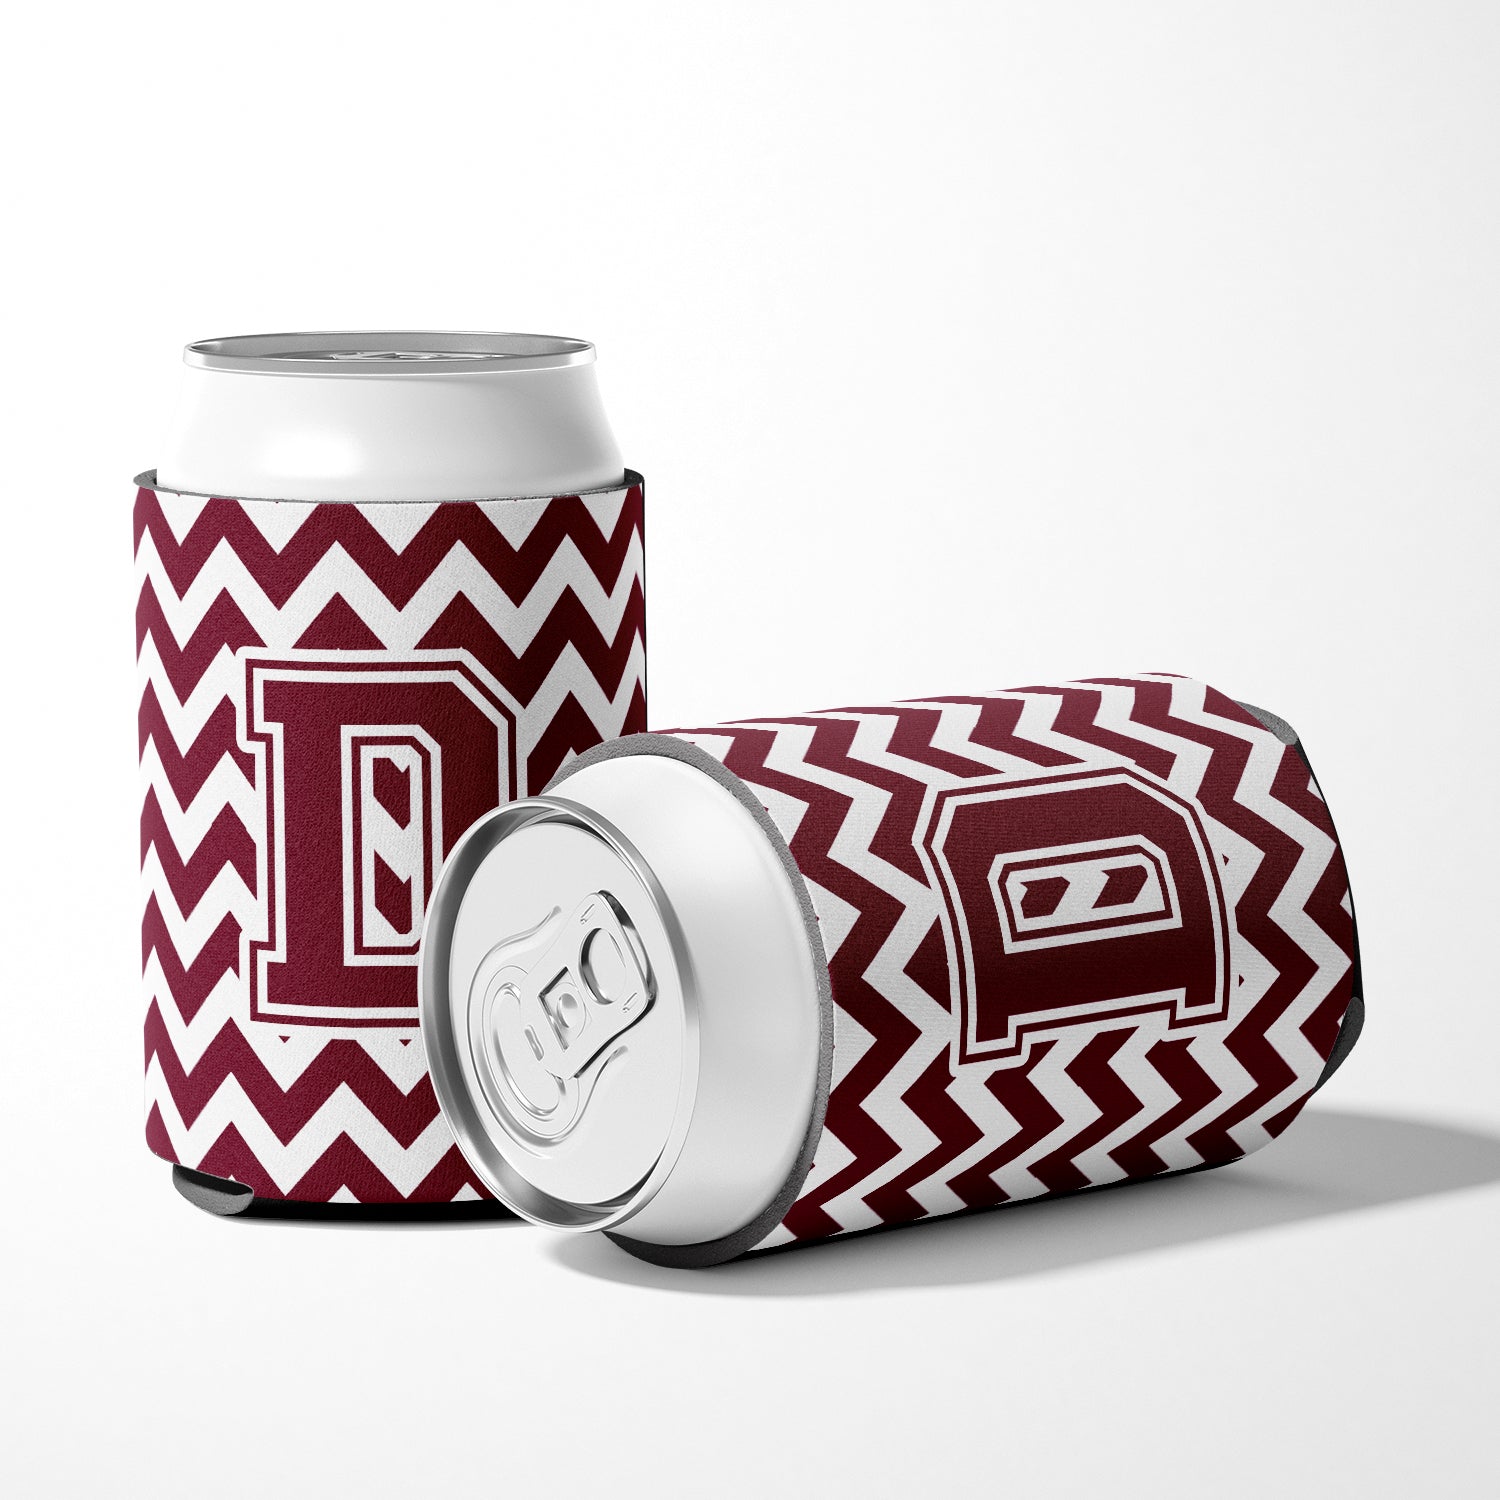 Letter D Chevron Maroon and White  Can or Bottle Hugger CJ1051-DCC.